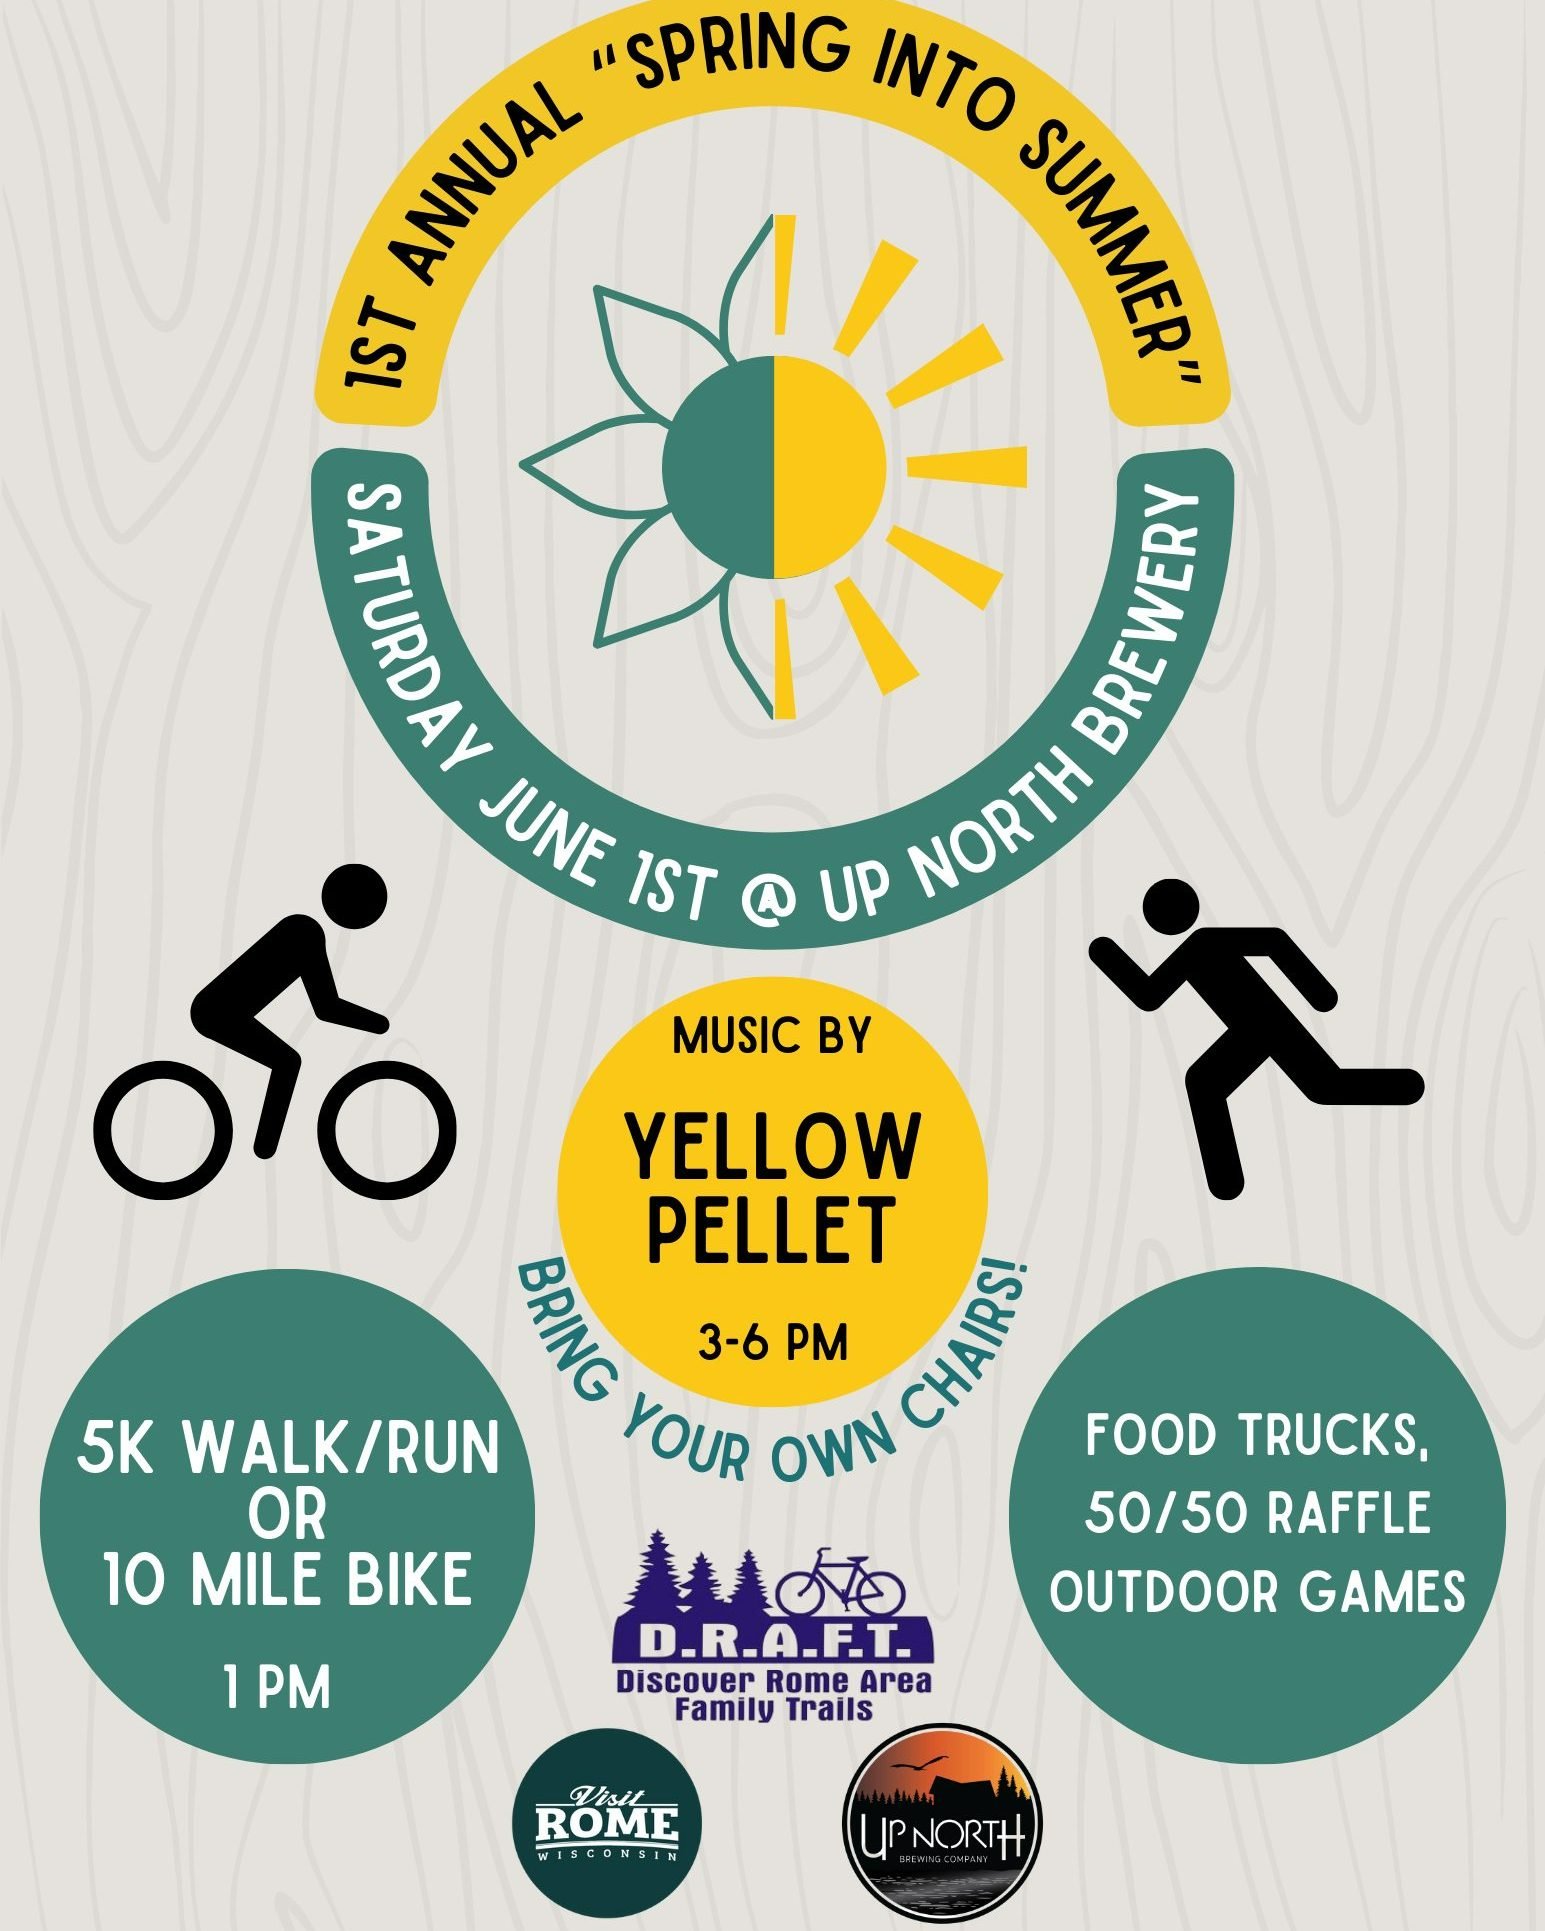 Are you ready to &quot;Spring into Summer&quot; on June 1st? ☀
Join our DRAFT friends on a Fun 5K Walk/Run or a 10 Mile Bike Ride starting at 1:00 PM at Up North Brewing Company. Afterwards, enjoy food trucks from 2-6pm, Yellow Pellet Band playing fr